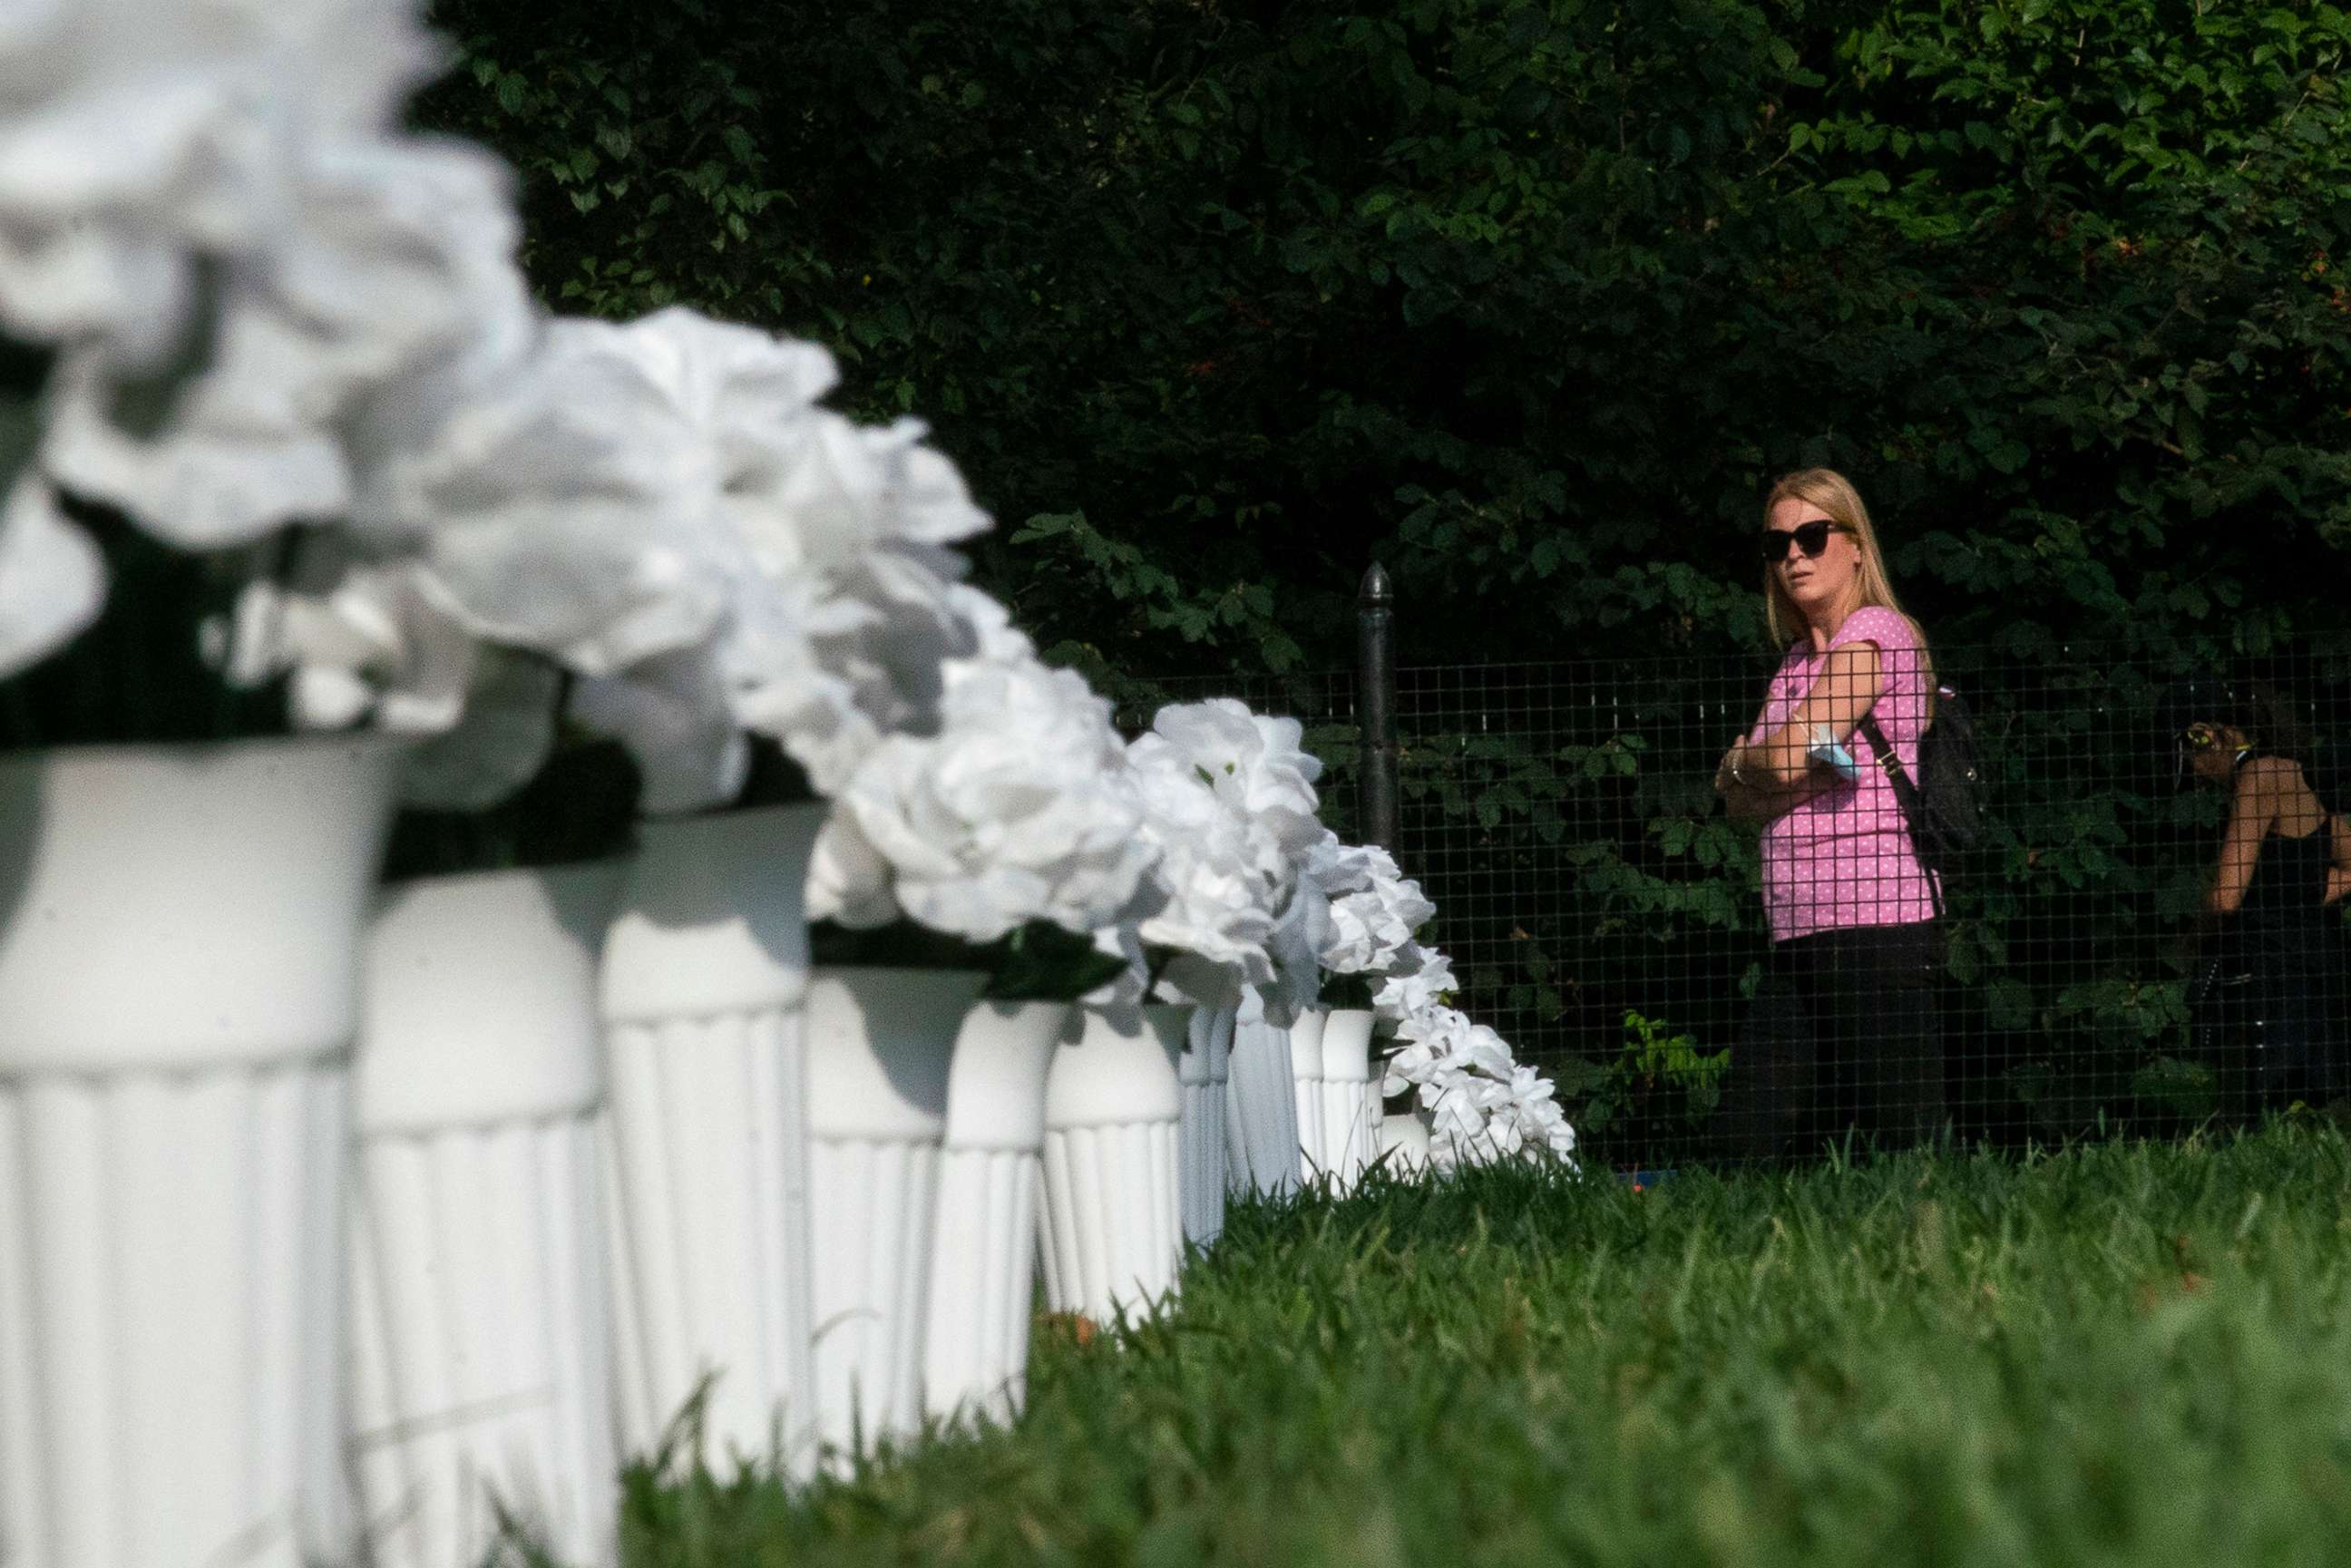 PHOTO: A woman looks at vases of white flowers that are part of an installation representing 1,050 lives lost by gun violence in New York last year, Oct. 7, 2021, in New York.